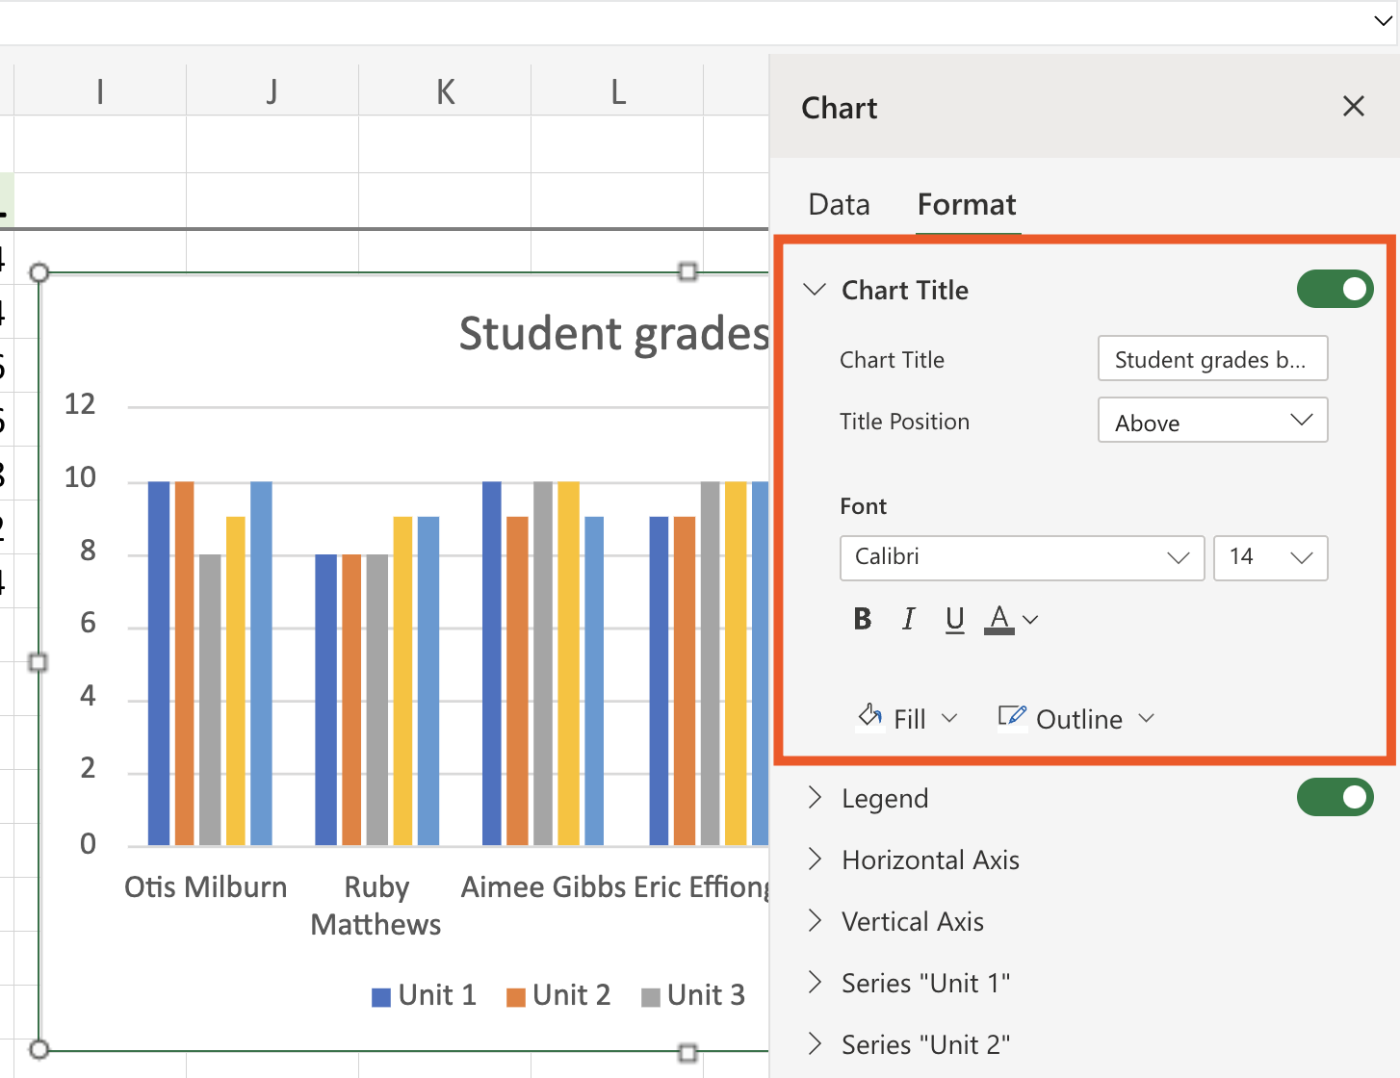 How to edit a chart in Excel using the chart format editor.